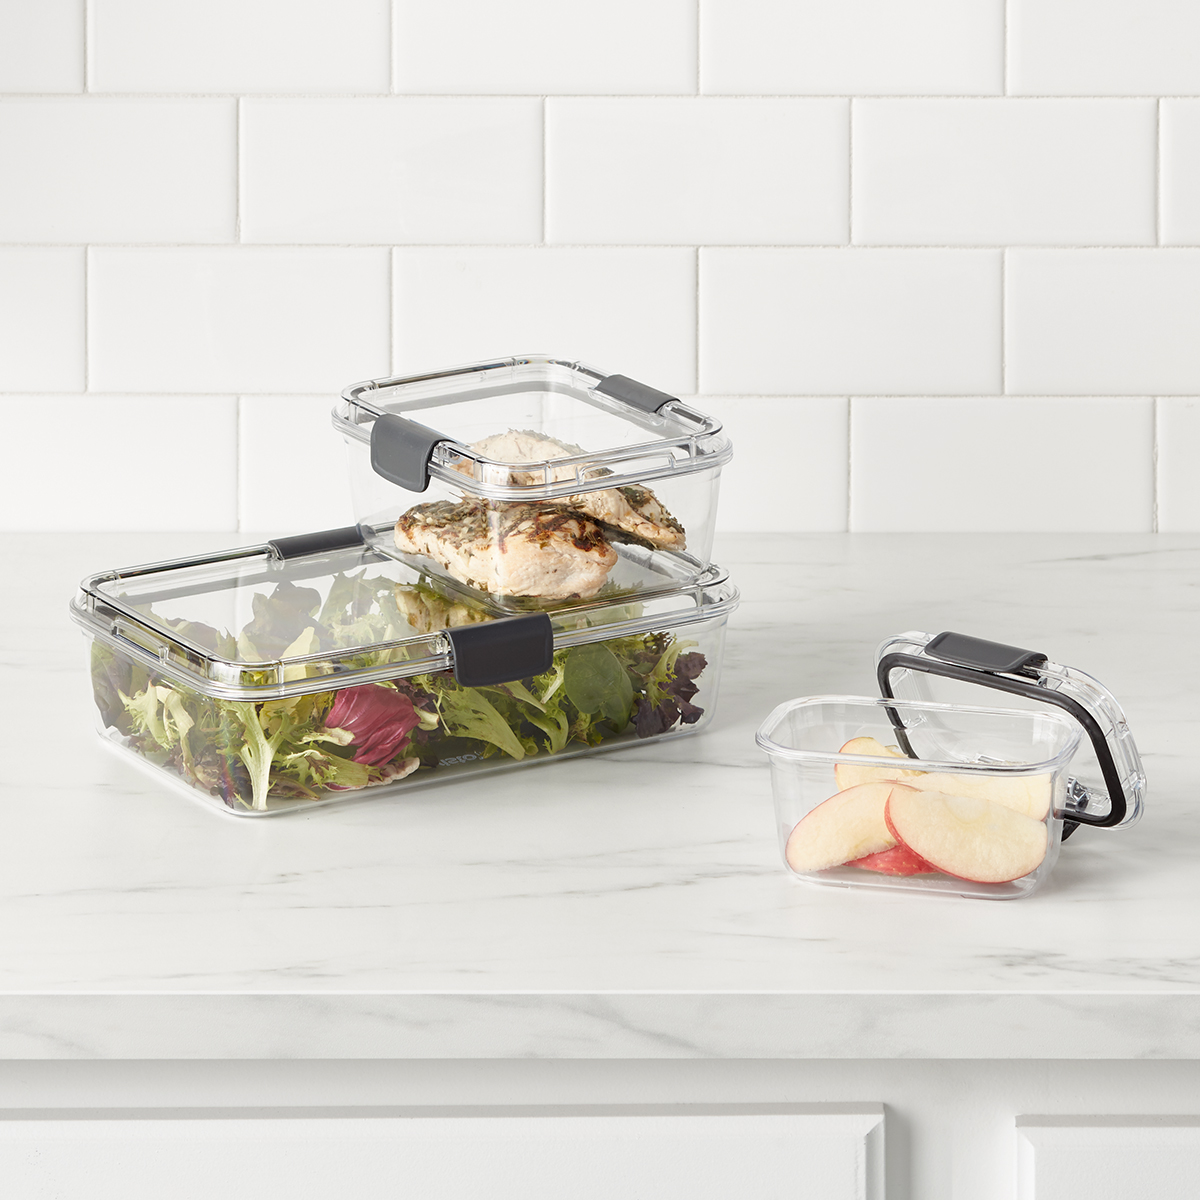 https://www.containerstore.com/catalogimages/416470/10083908g-ClearlyFresh-containers.jpg